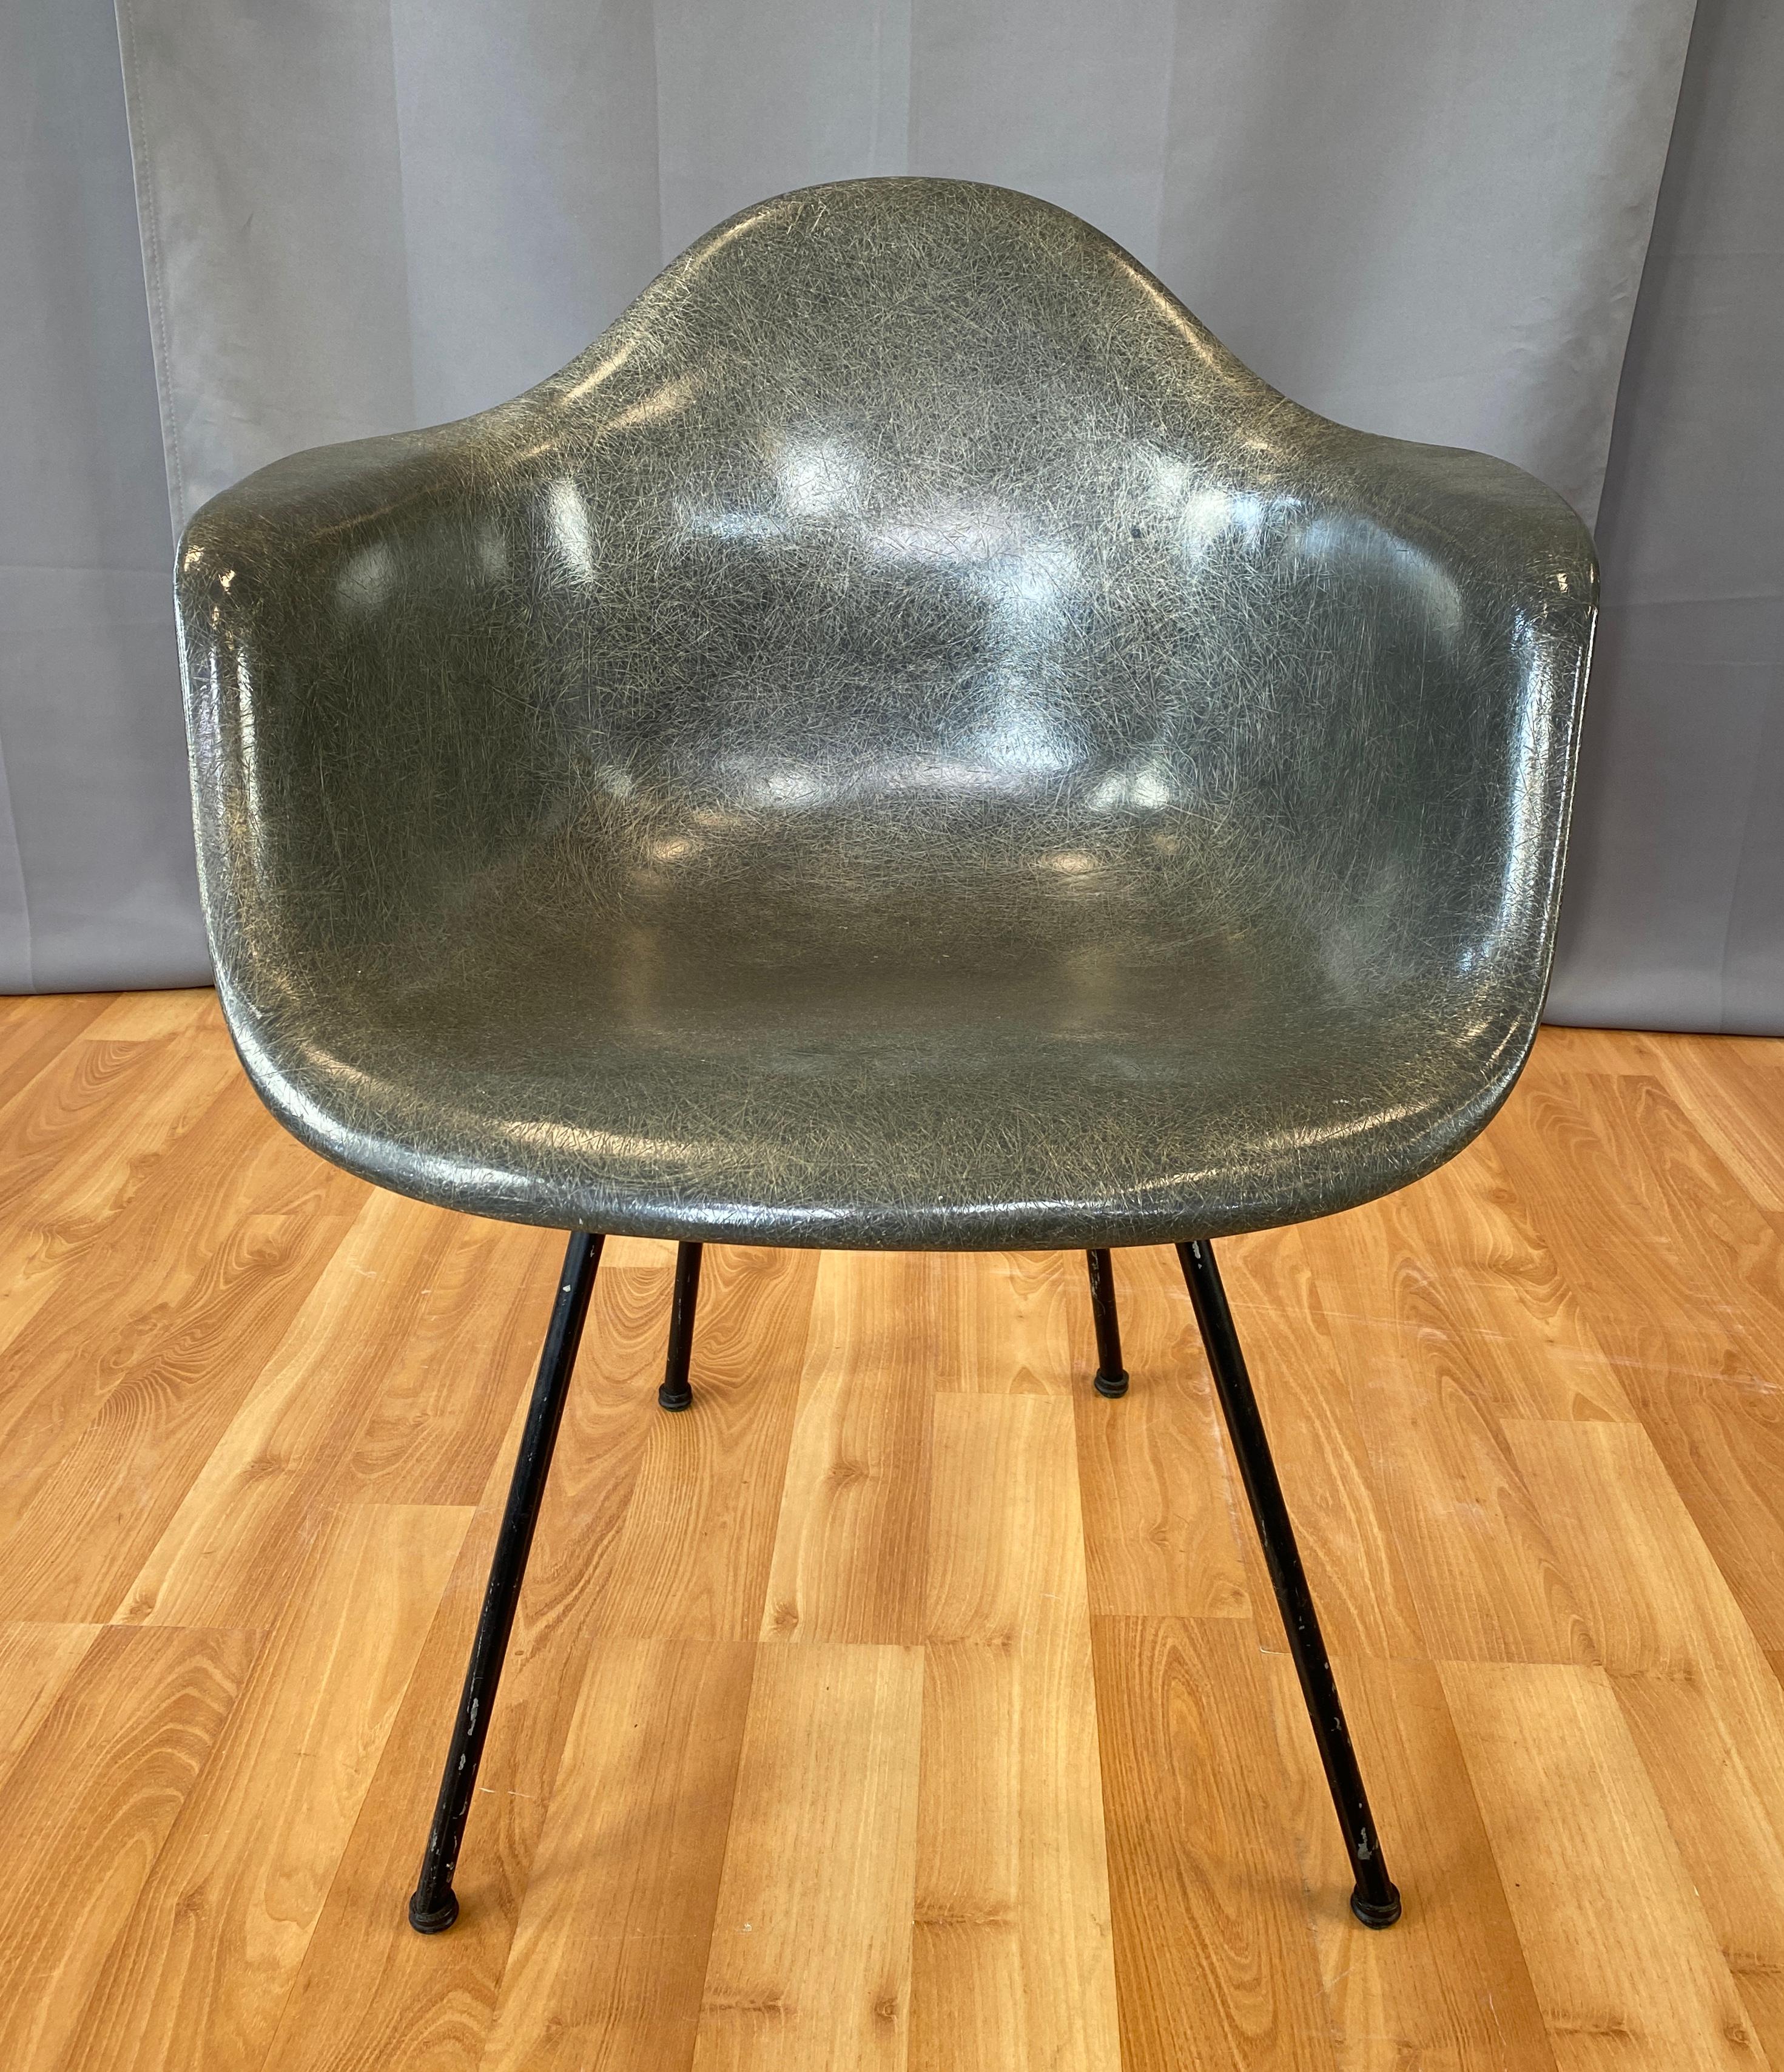 Mid-Century Modern 1st Generation Zenith Plastic Rope Edge Chair, Charles Eames for Herman Miller A